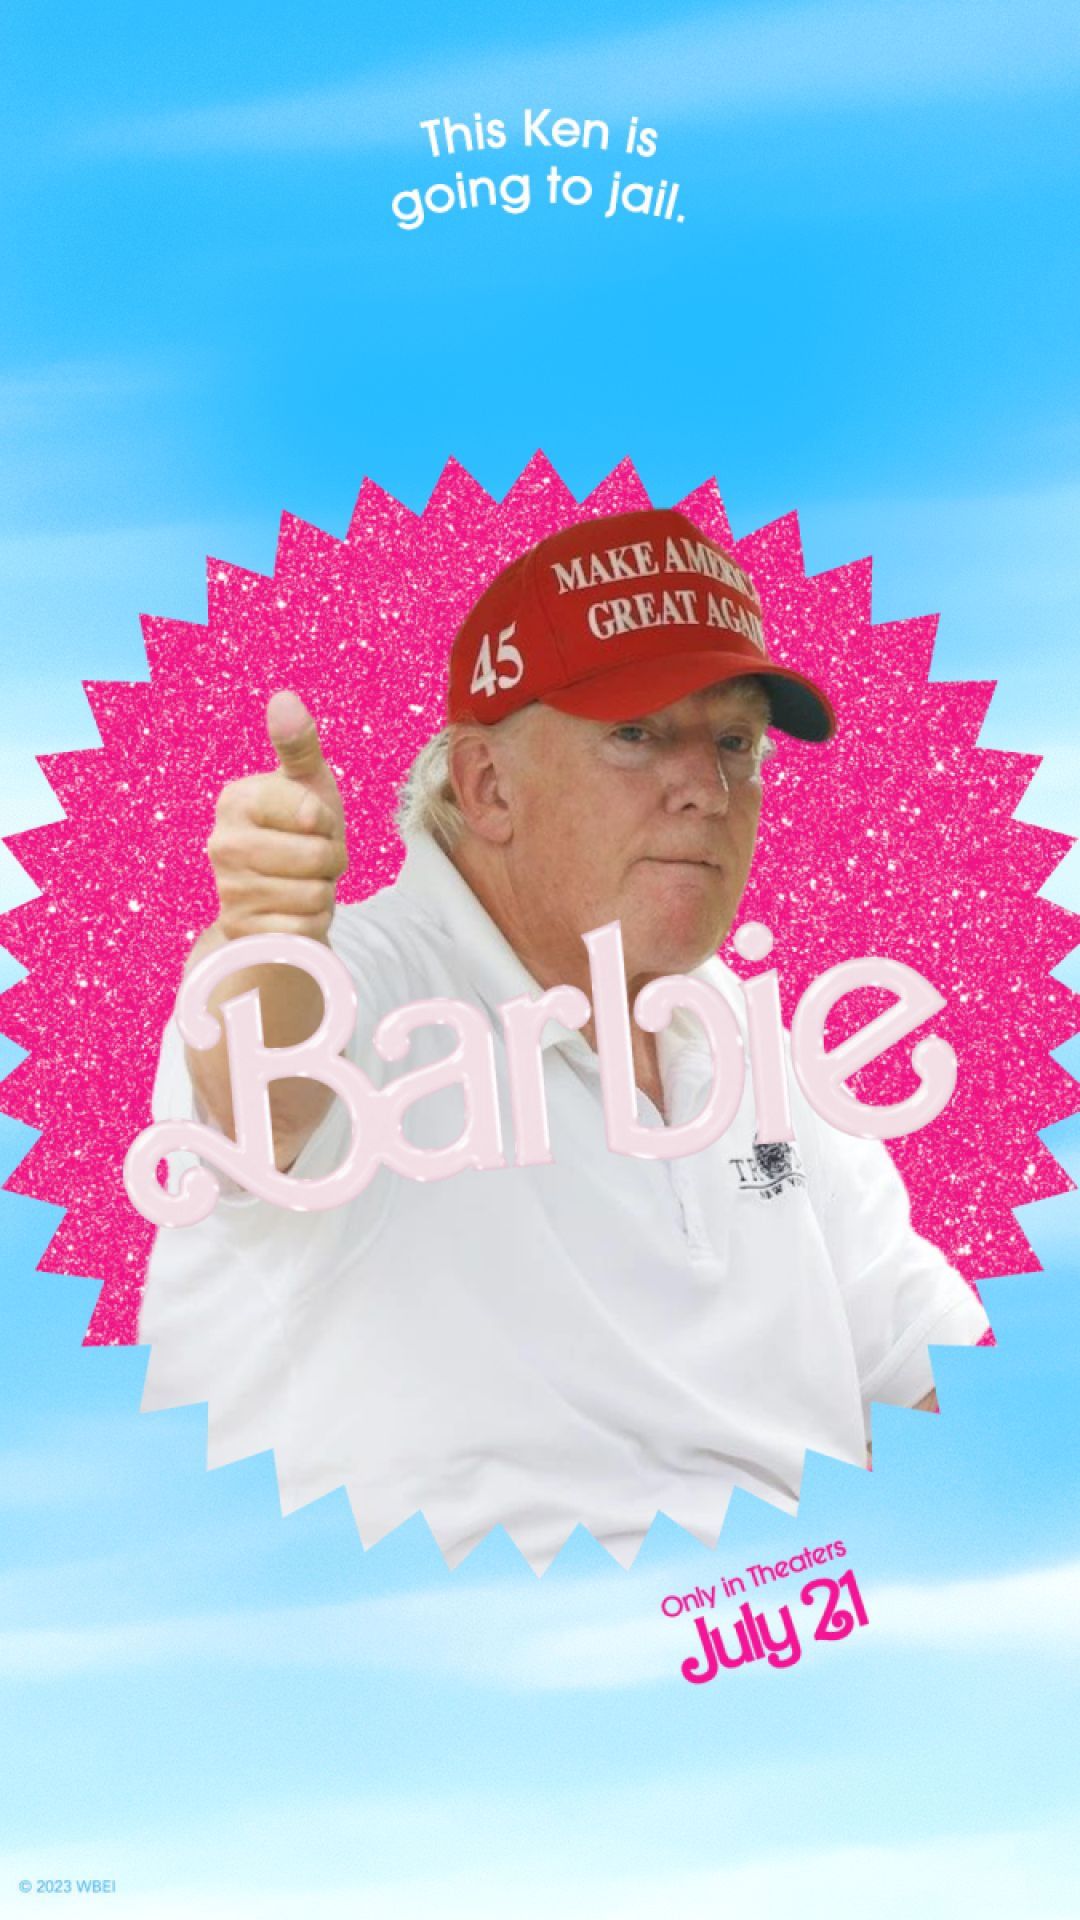 A barbie poster with Trump giving a thumbs up. The text at the top reads, "This Ken is going to jail."